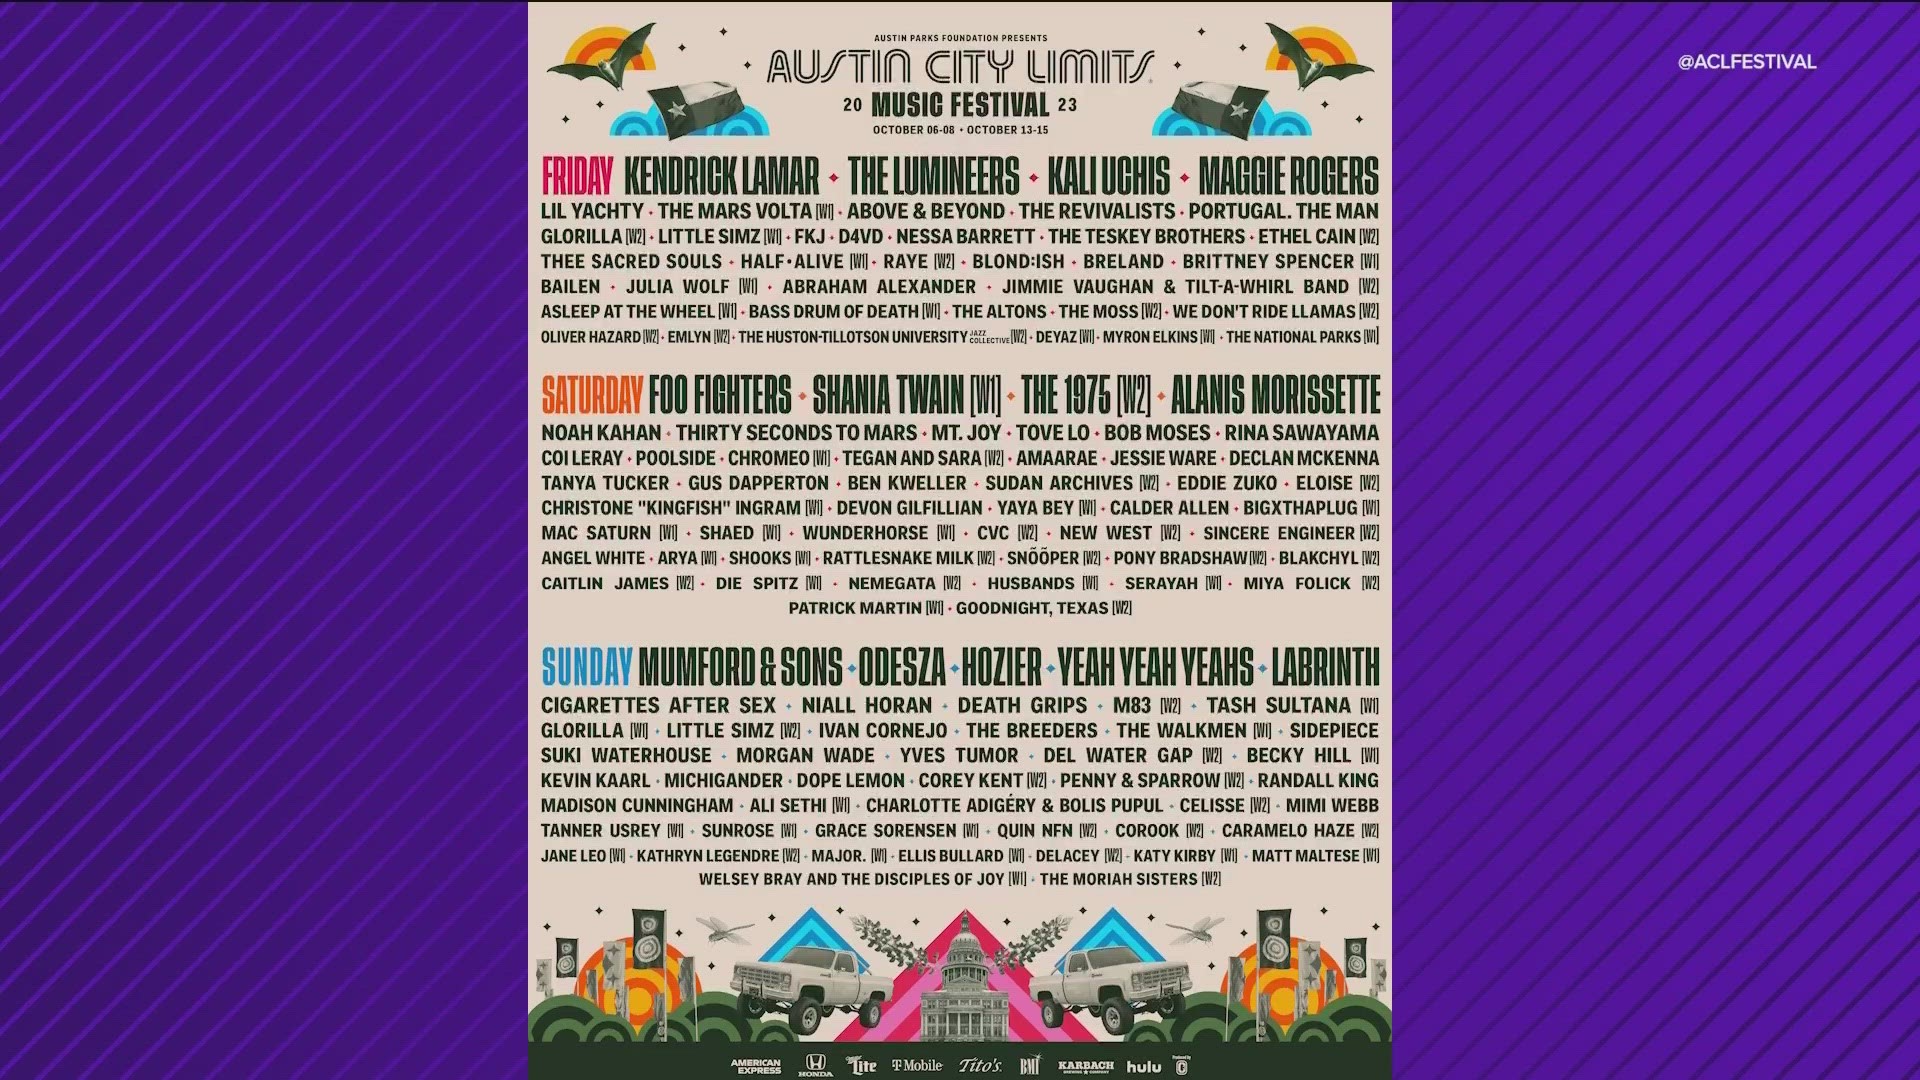 The ACL lineup by day is here.